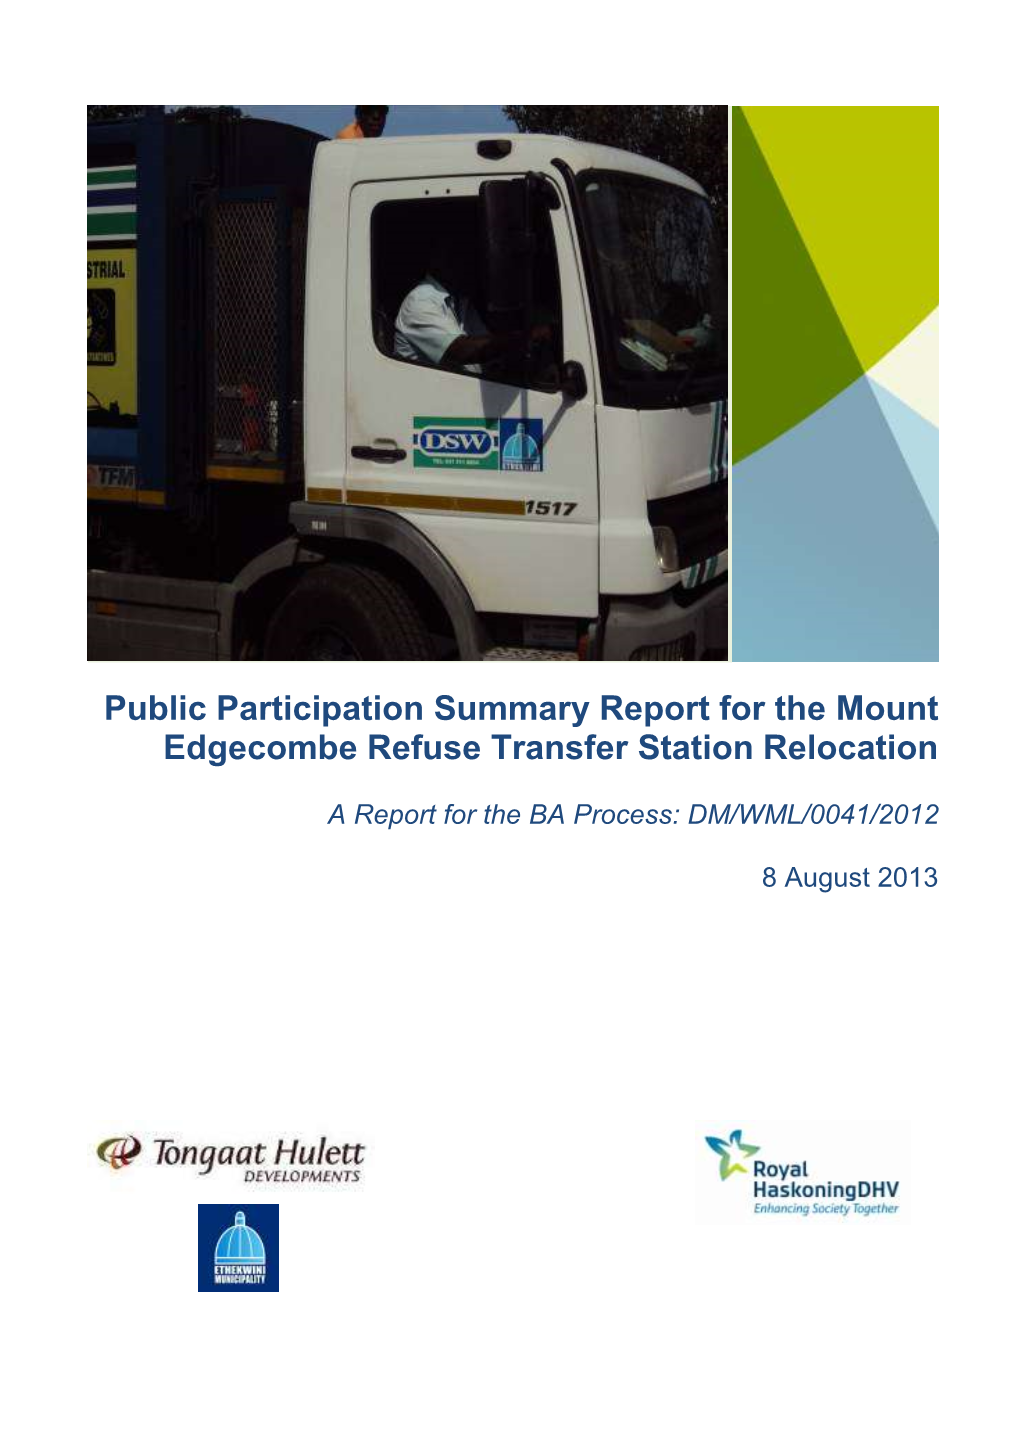 Public Participation Summary Report for the Mount Edgecombe Refuse Transfer Station Relocation